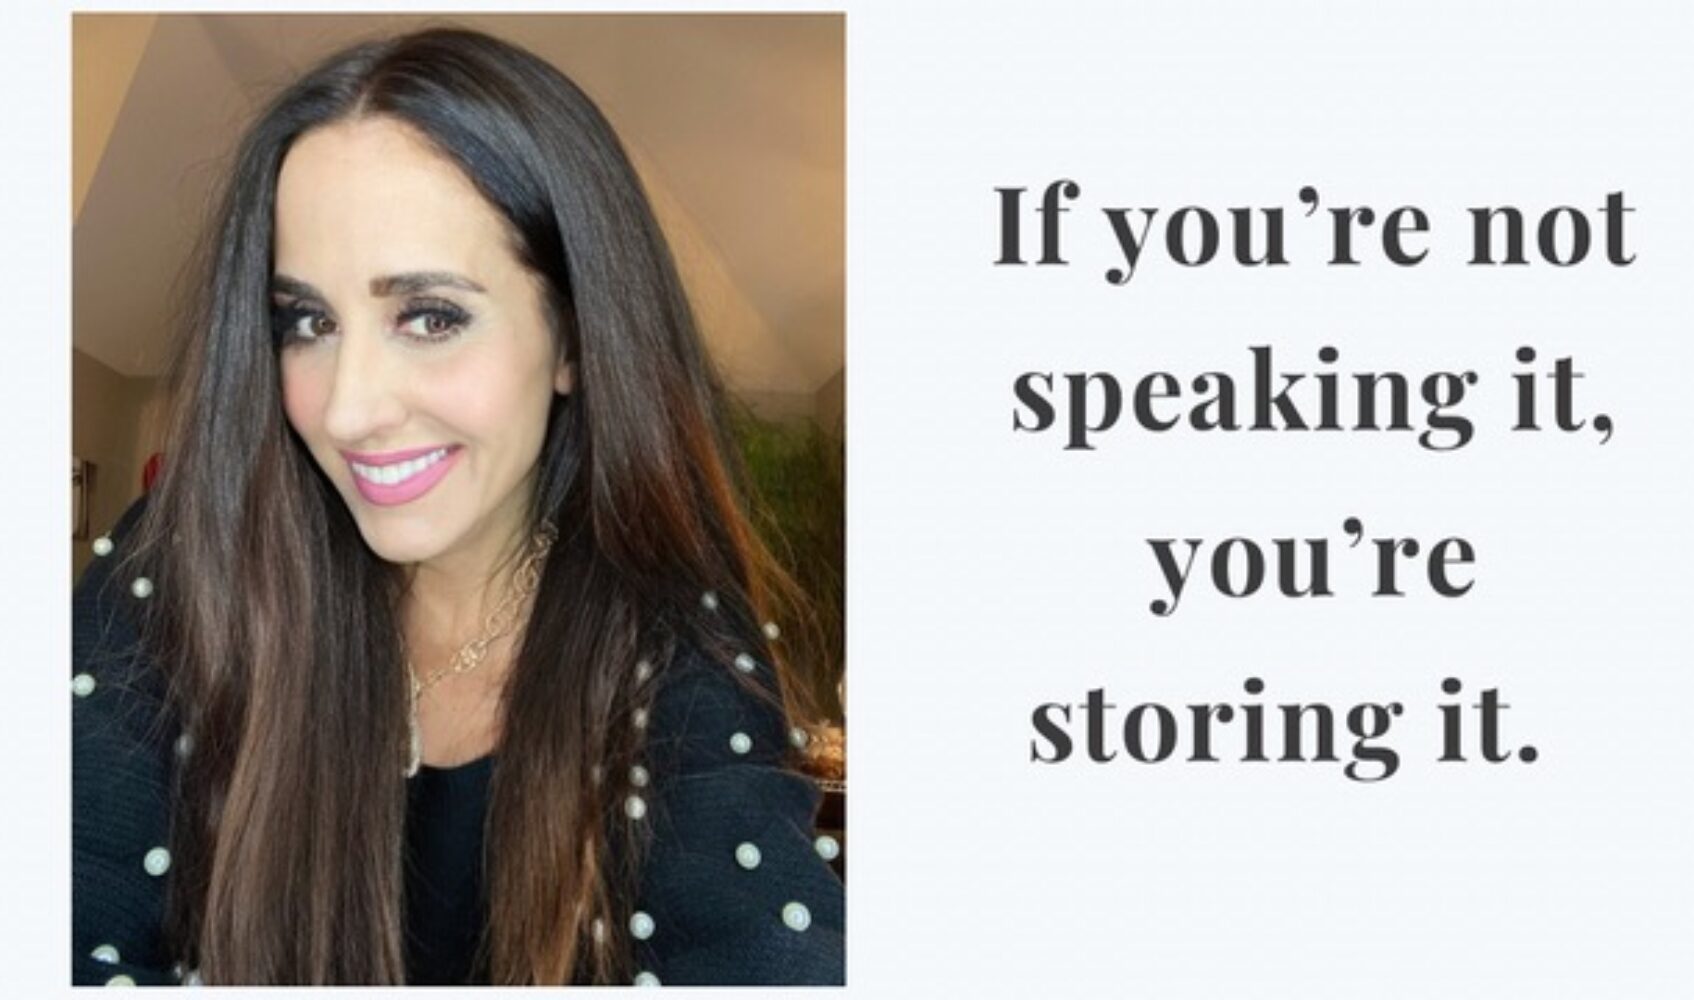 If you’re not speaking it, you’re storing it.